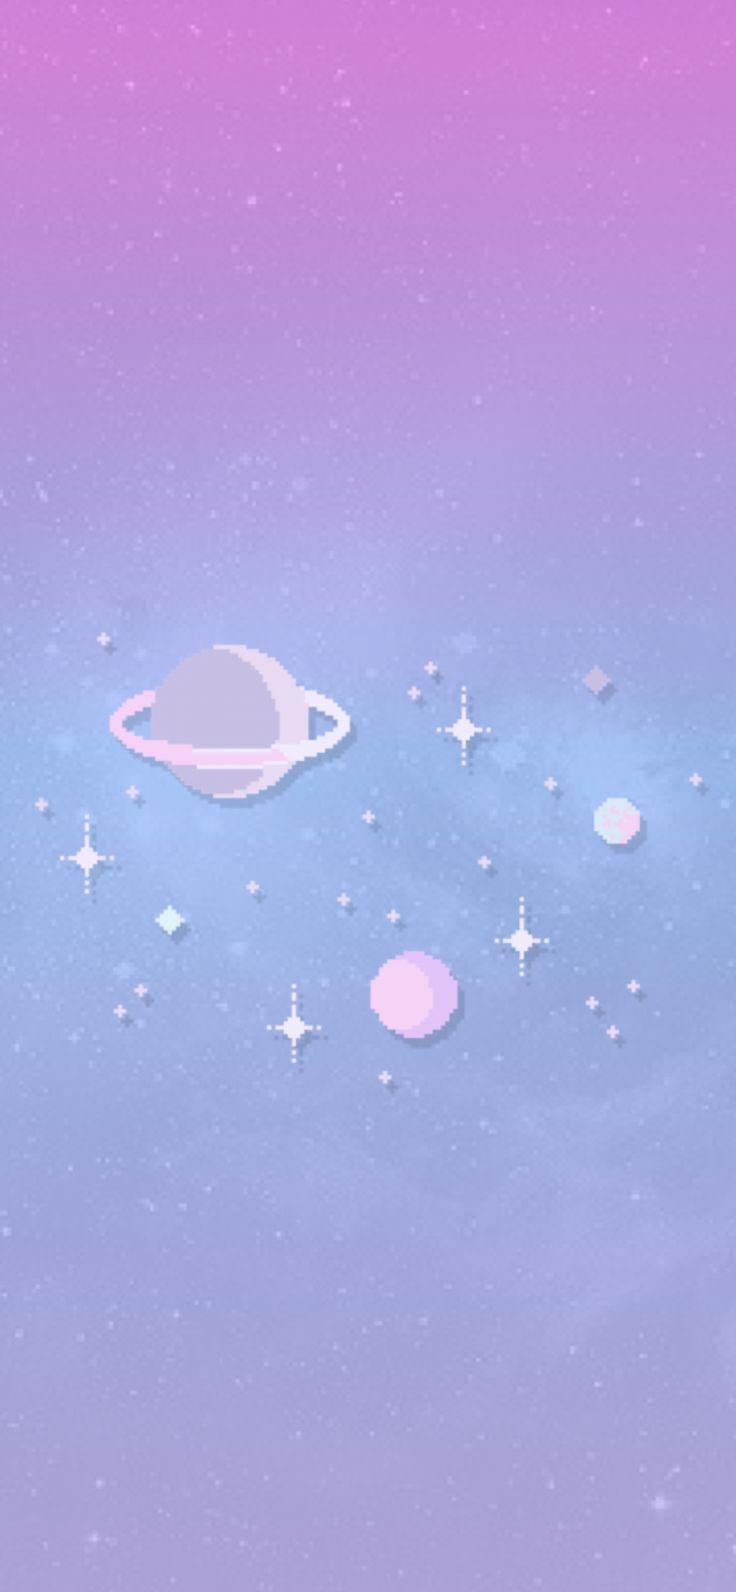 Pink Space Aesthetic Wallpapers - Top Free Pink Space Aesthetic ...